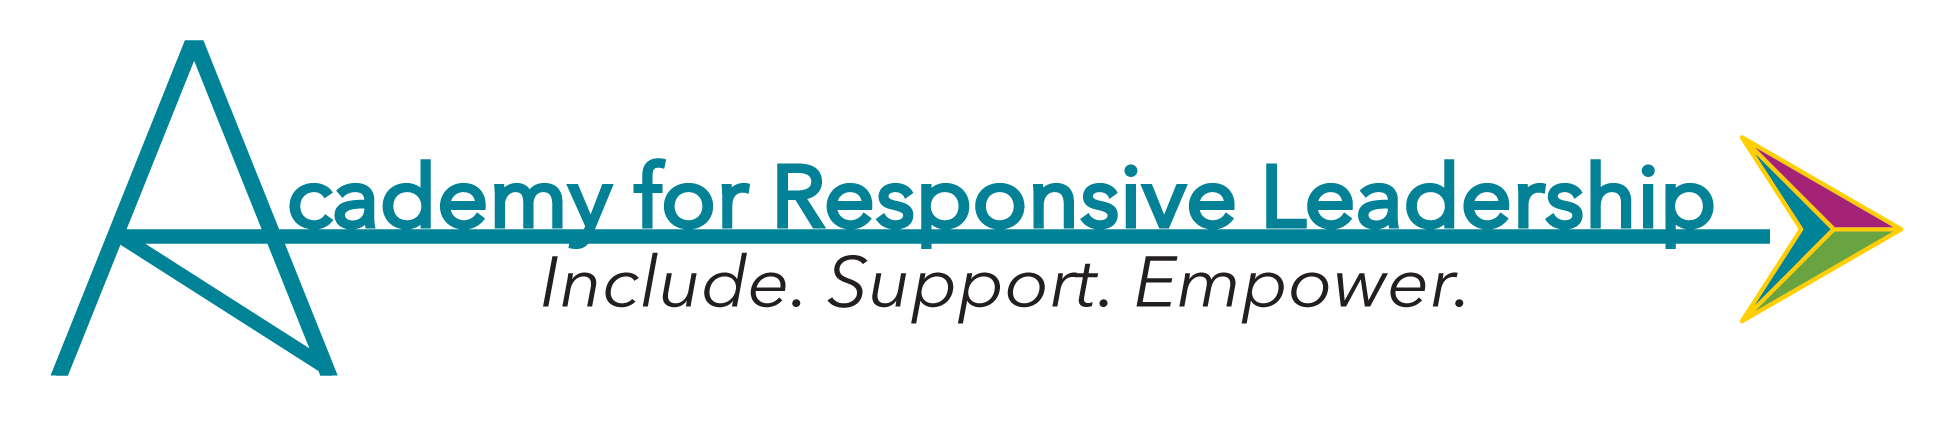 Academy for Responsive Leadership: Include, support, empower